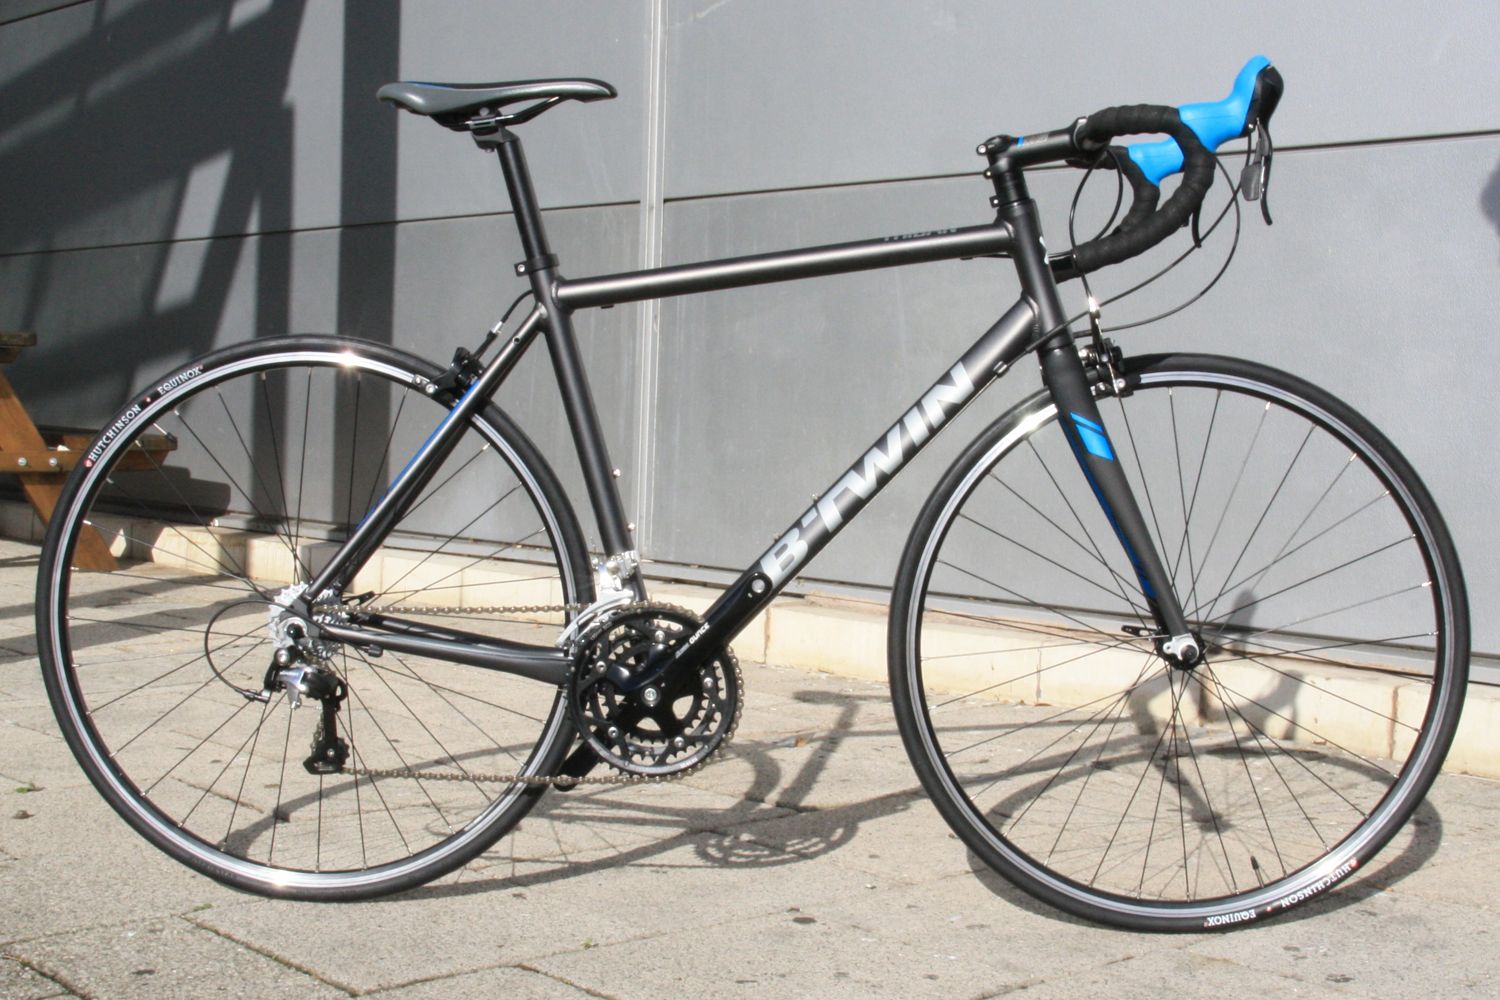 btwin cycle without gear